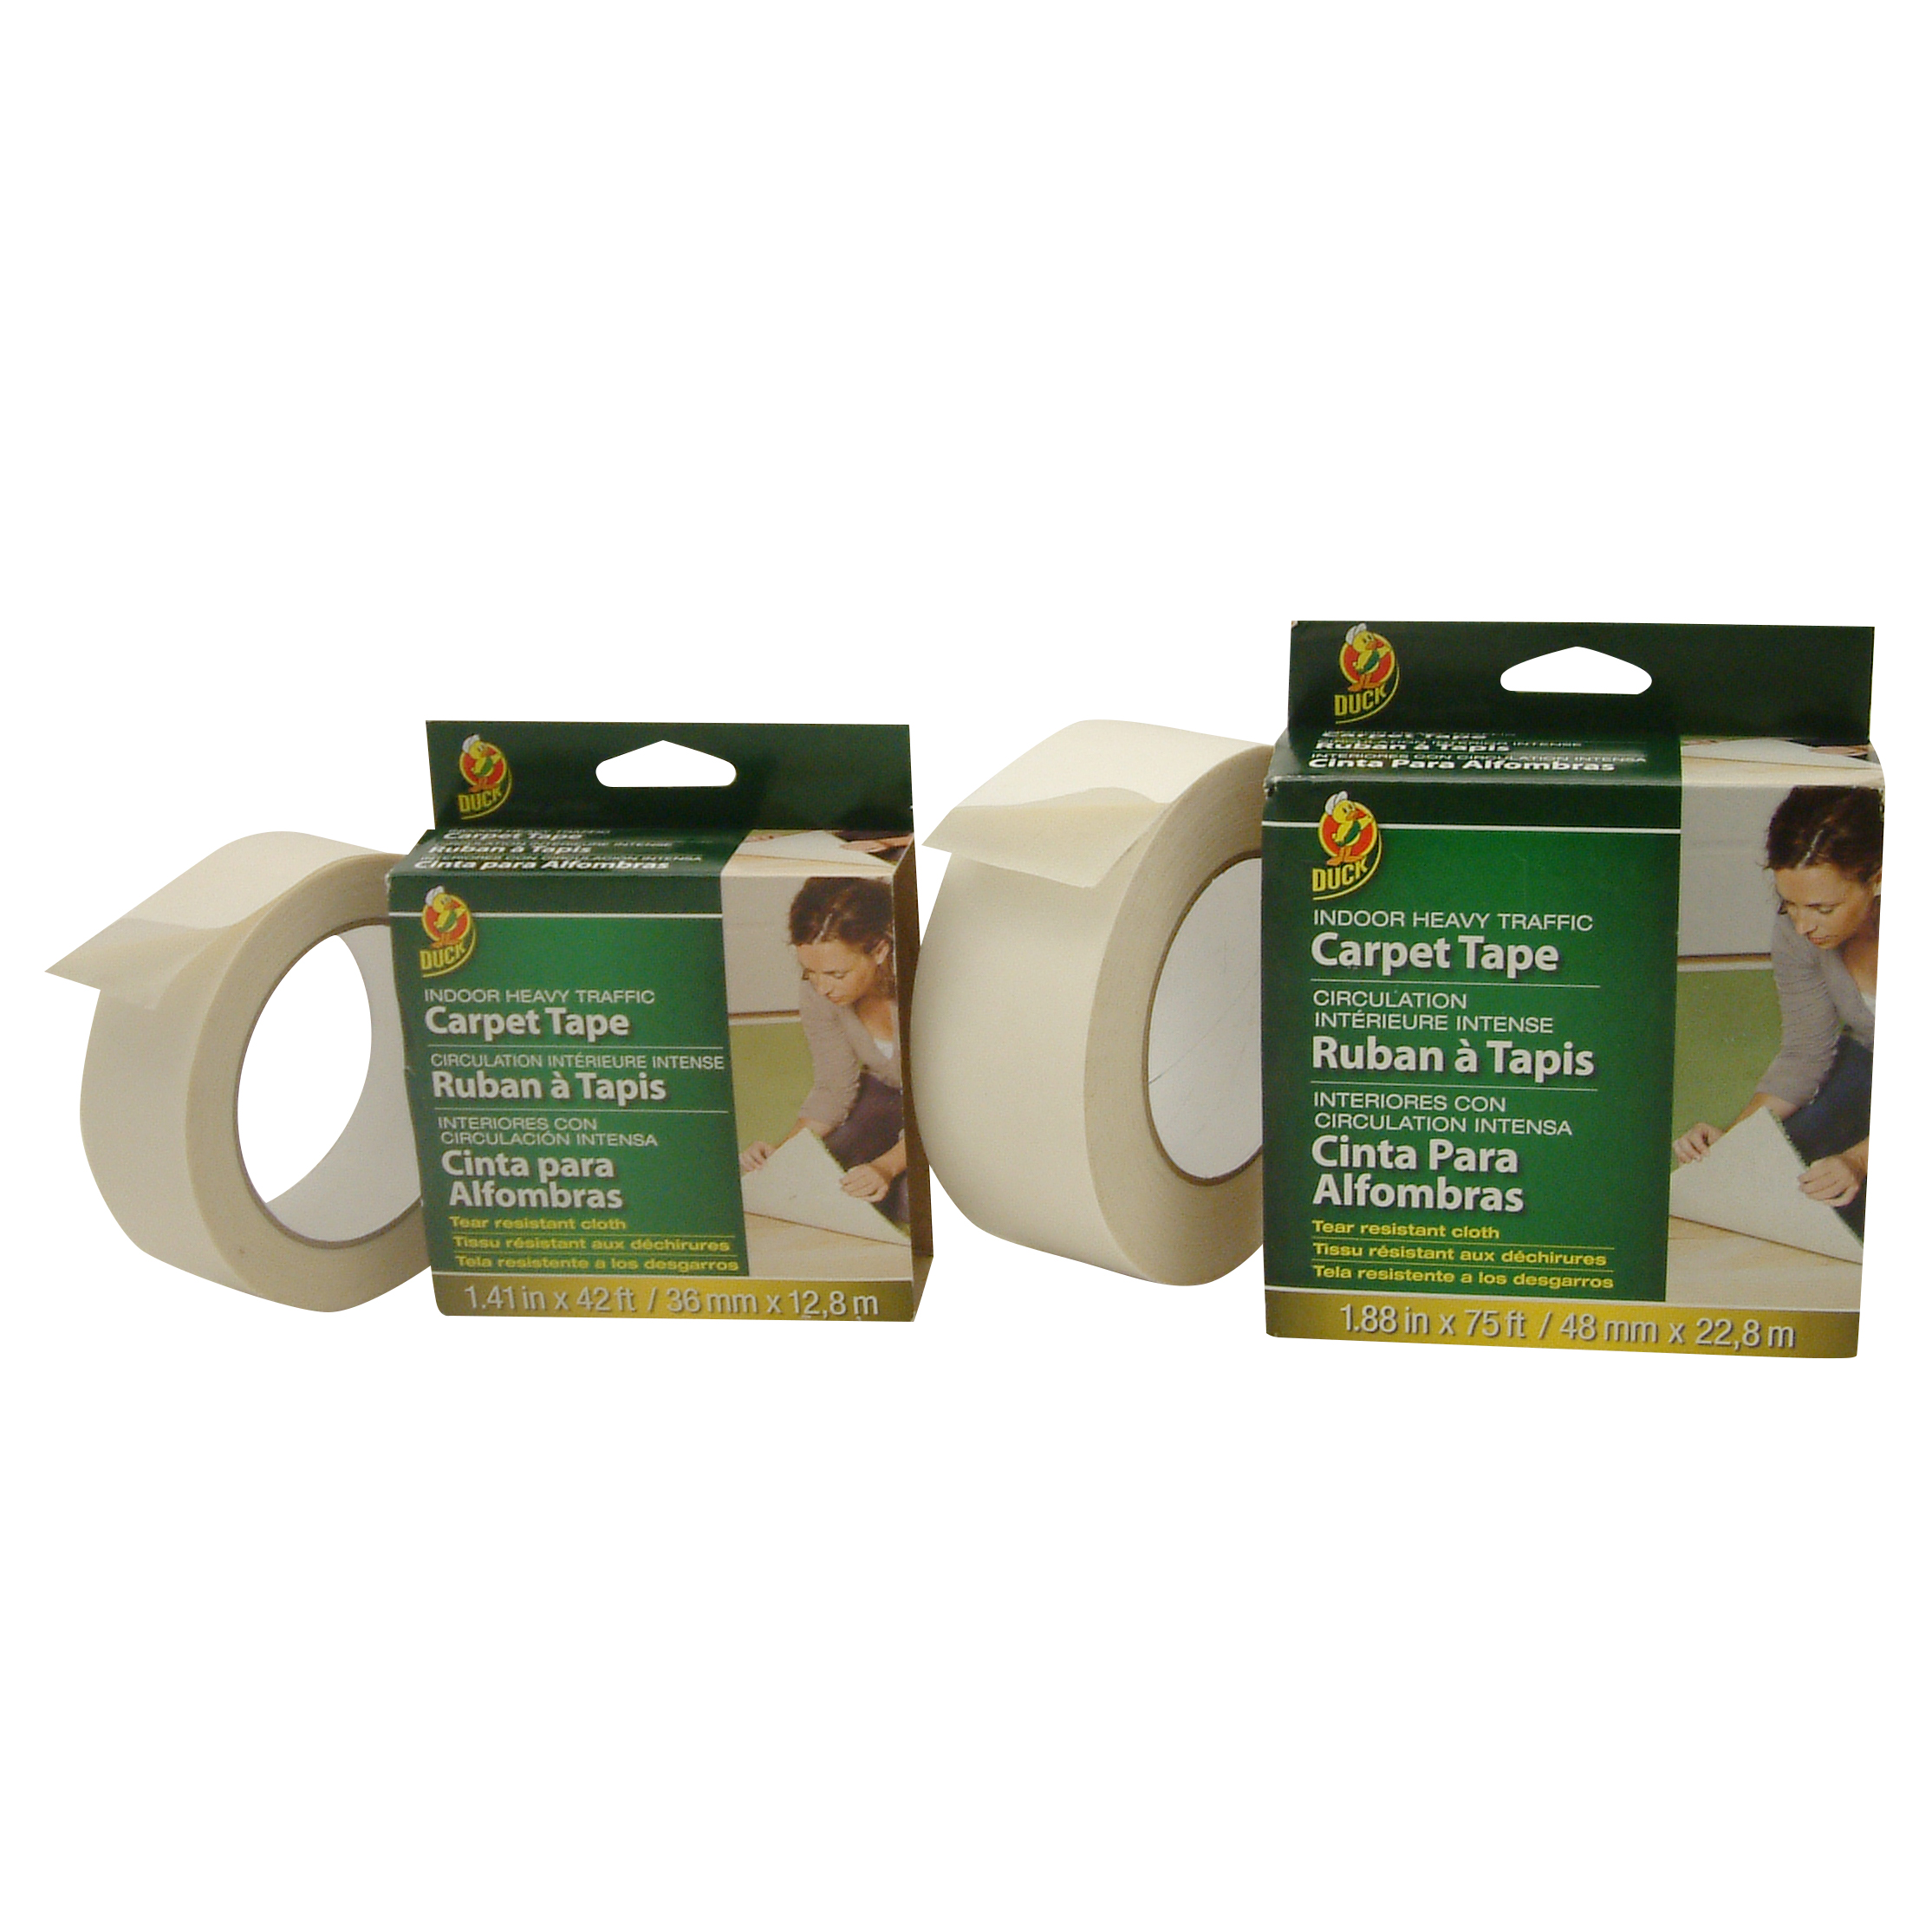 Duck Brand Indoor Heavy Traffic Double-Sided Carpet Tape [Permanent]